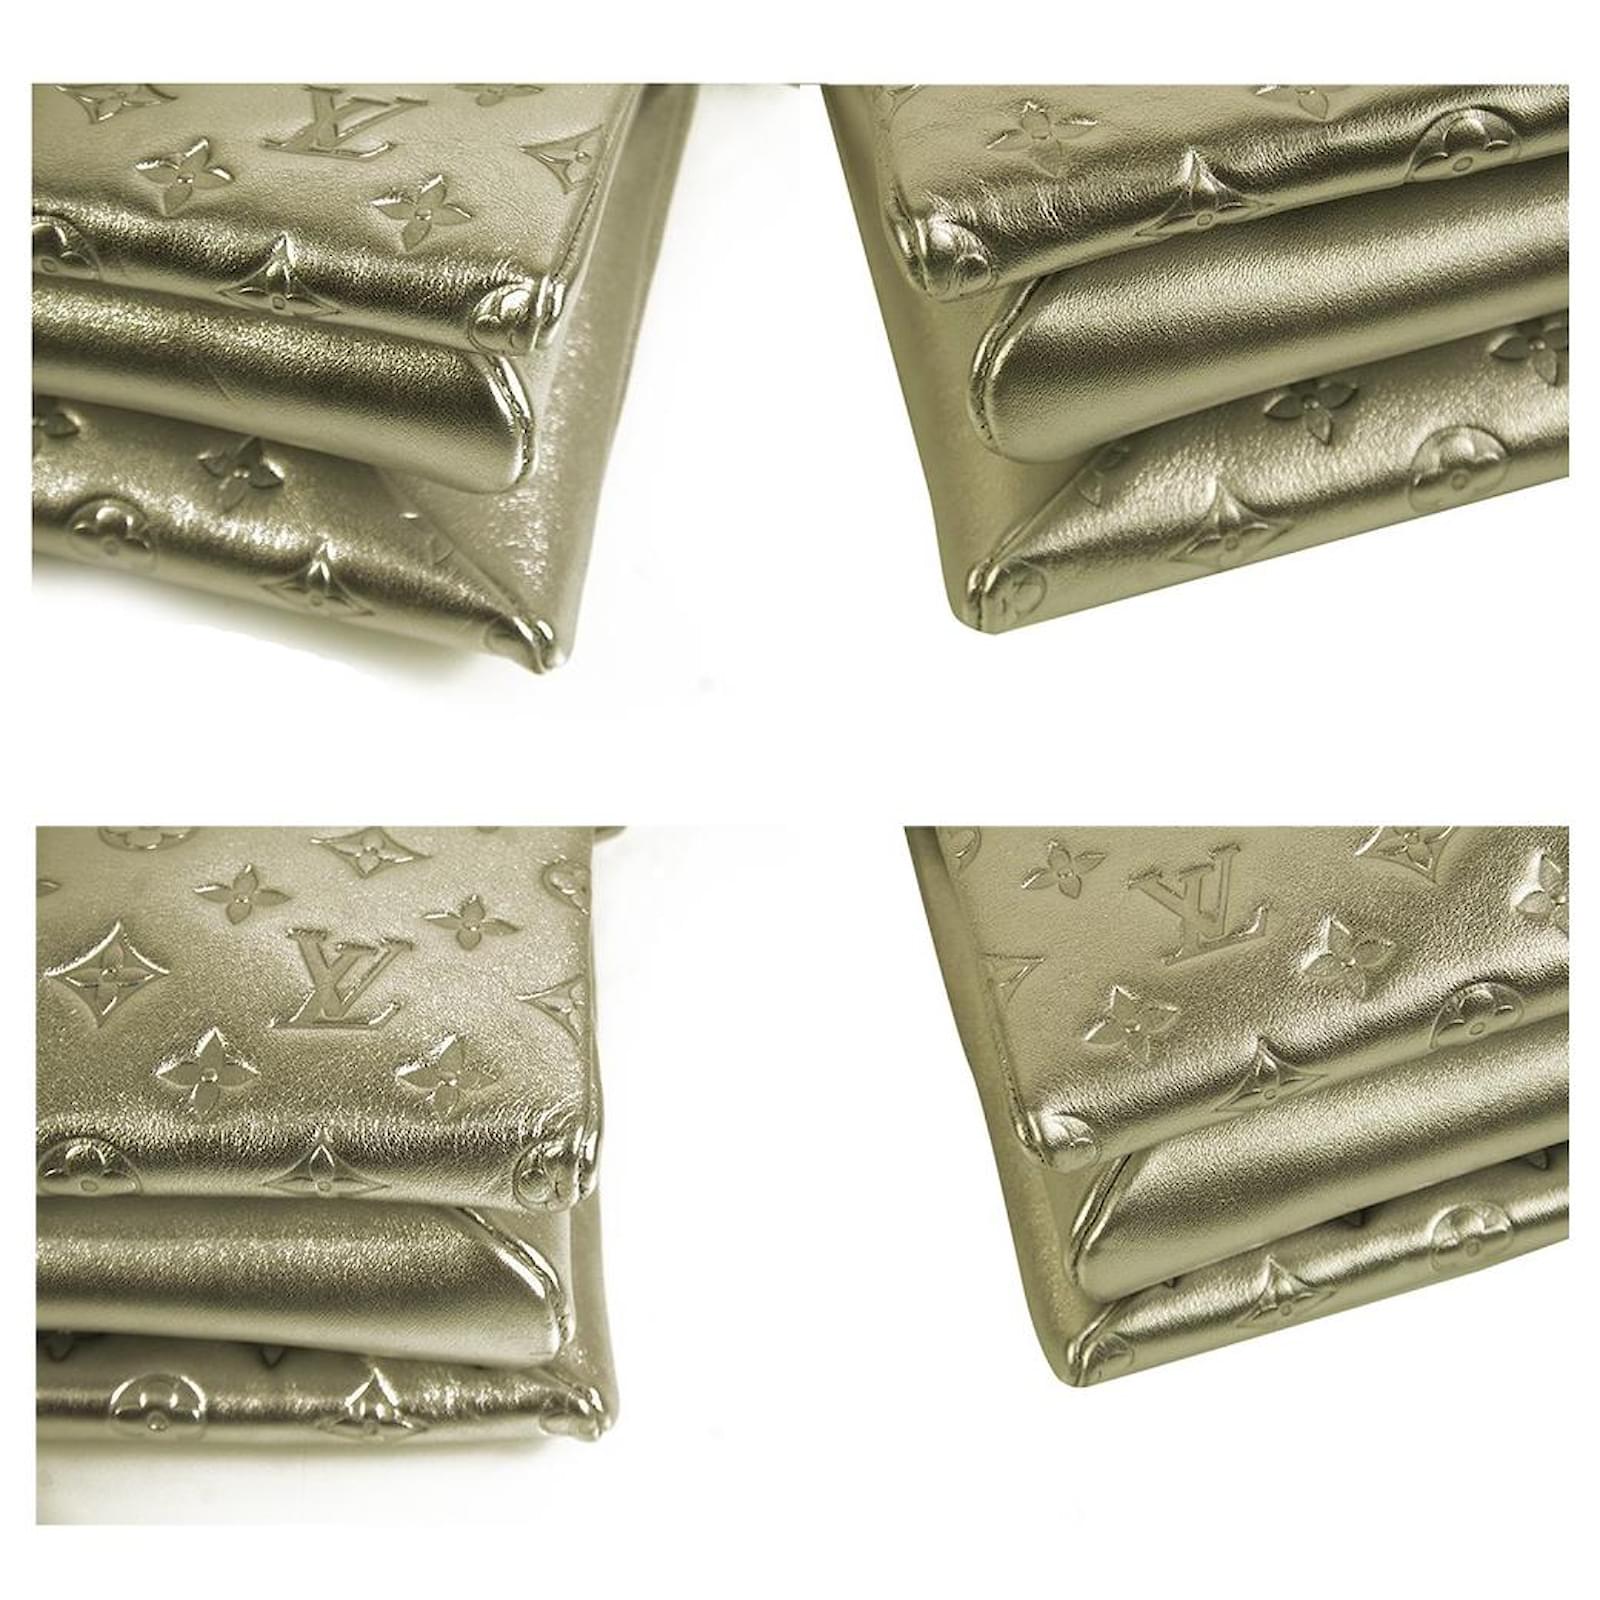 Louis Vuitton Brown Puffy Monogram Lambskin Coussin PM Gold Hardware  Available For Immediate Sale At Sotheby's